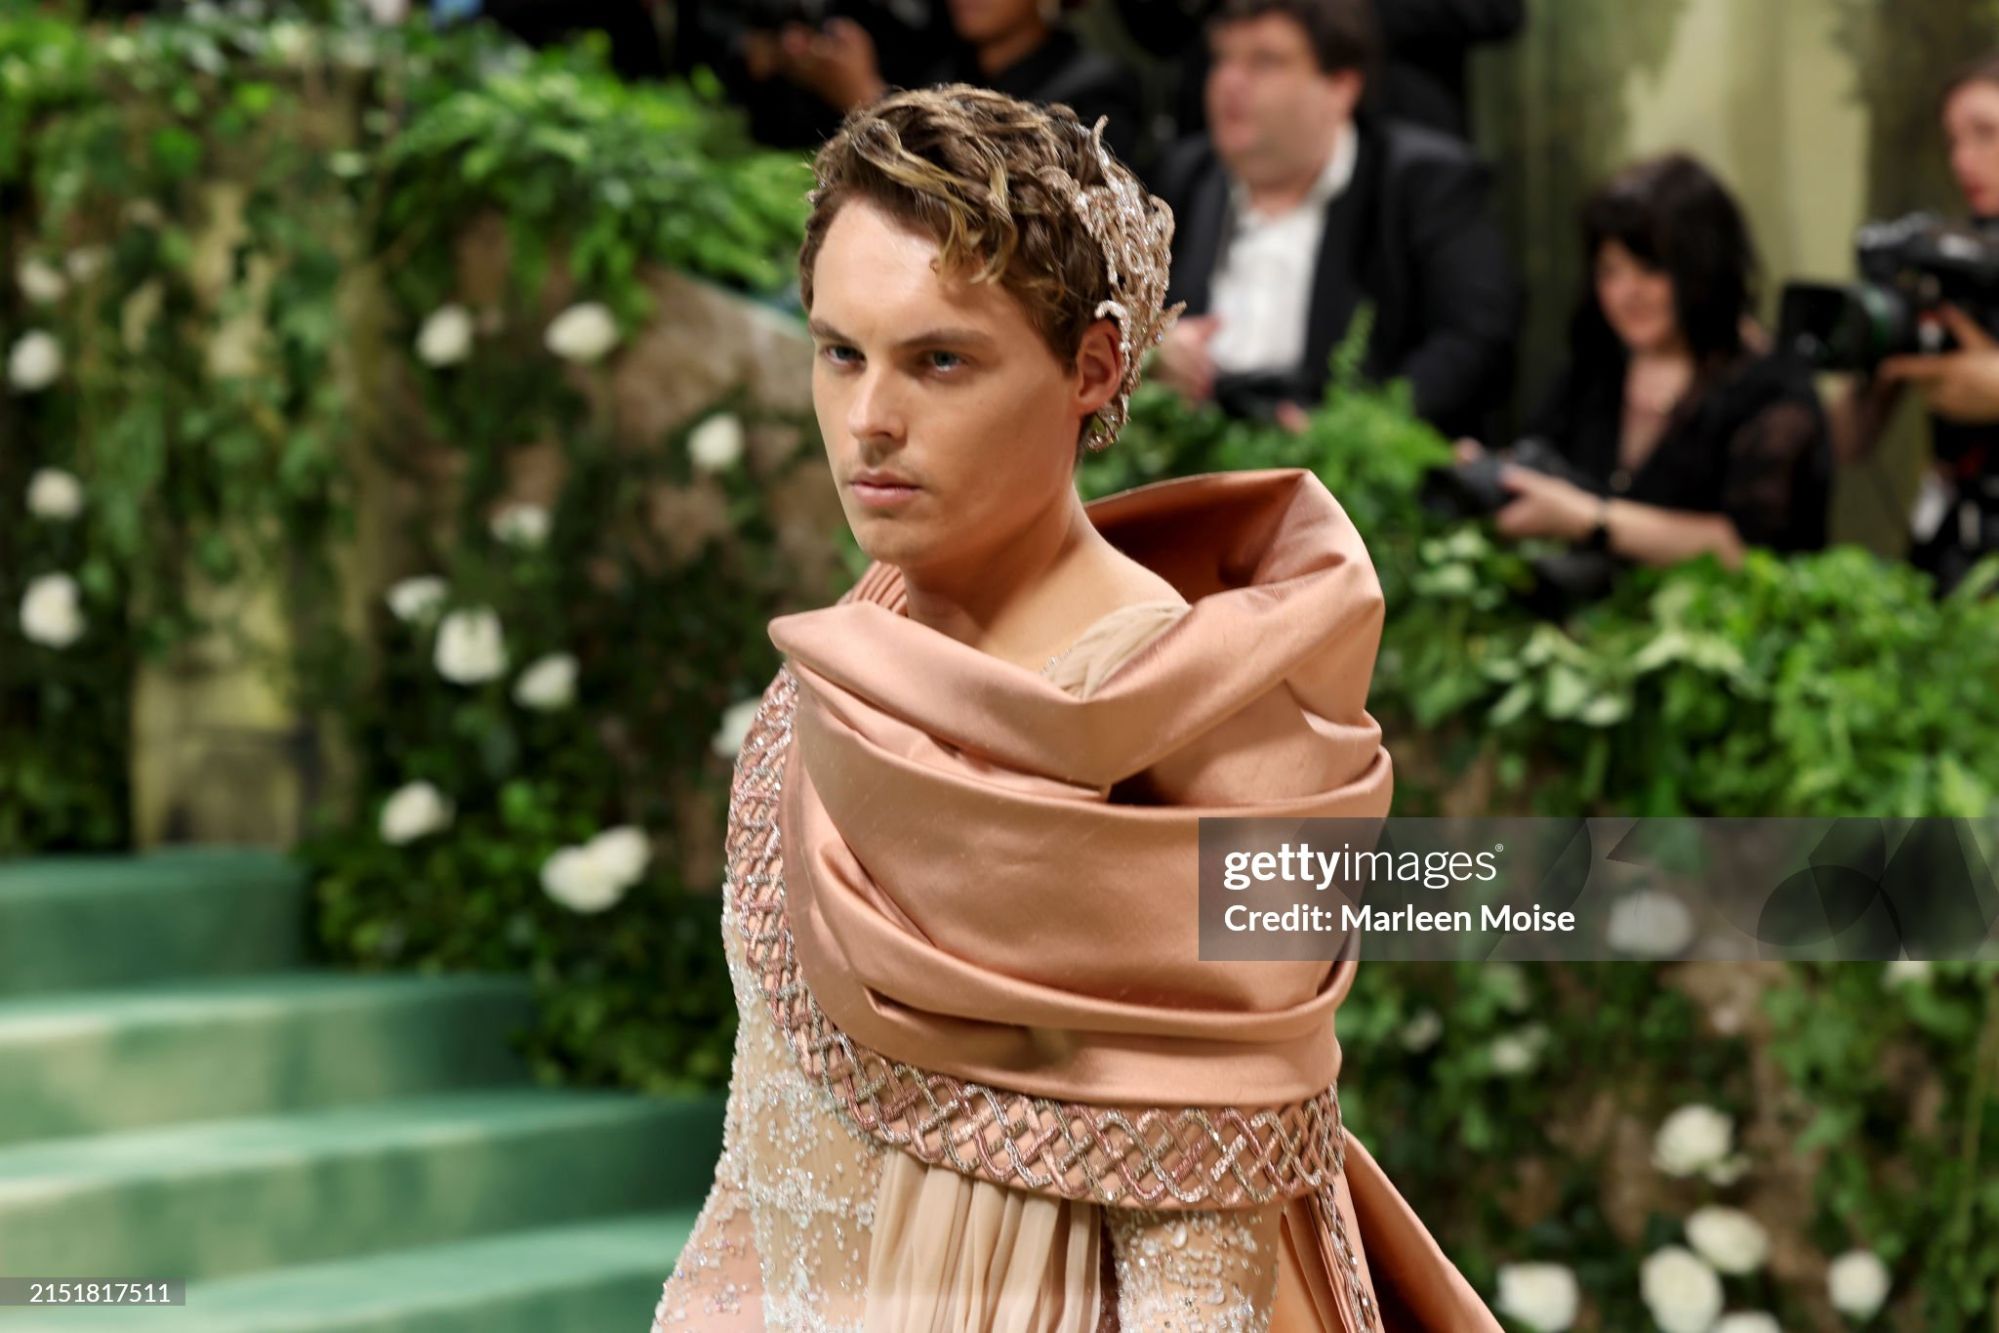 gettyimages-2151817511-2048x2048.jpg